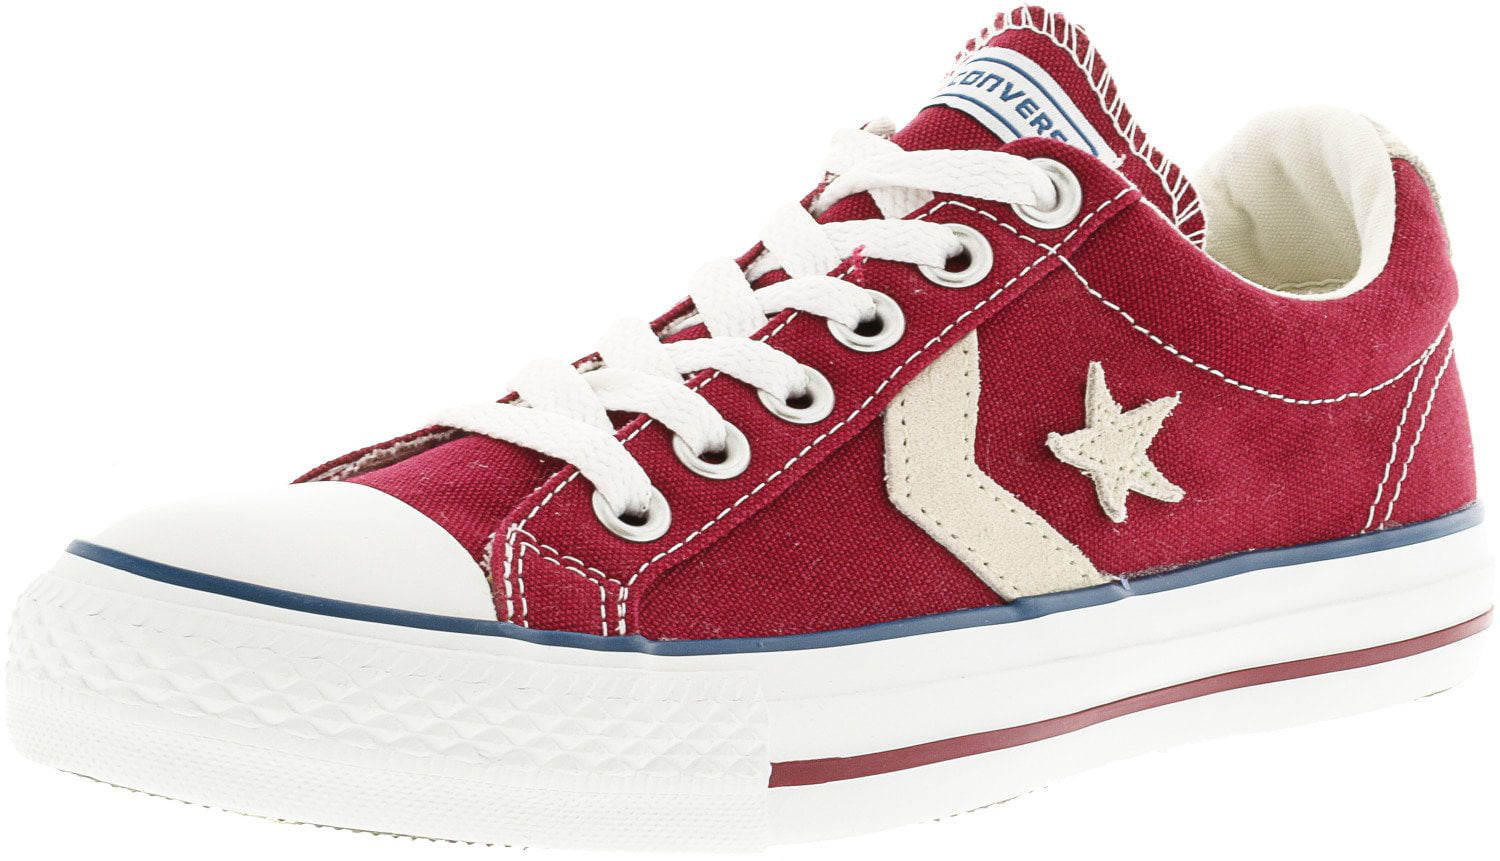 Converse Star Player Ox Red / White Ankle-High Canvas Sneaker - 5M 3M كرسيدا ٩٠